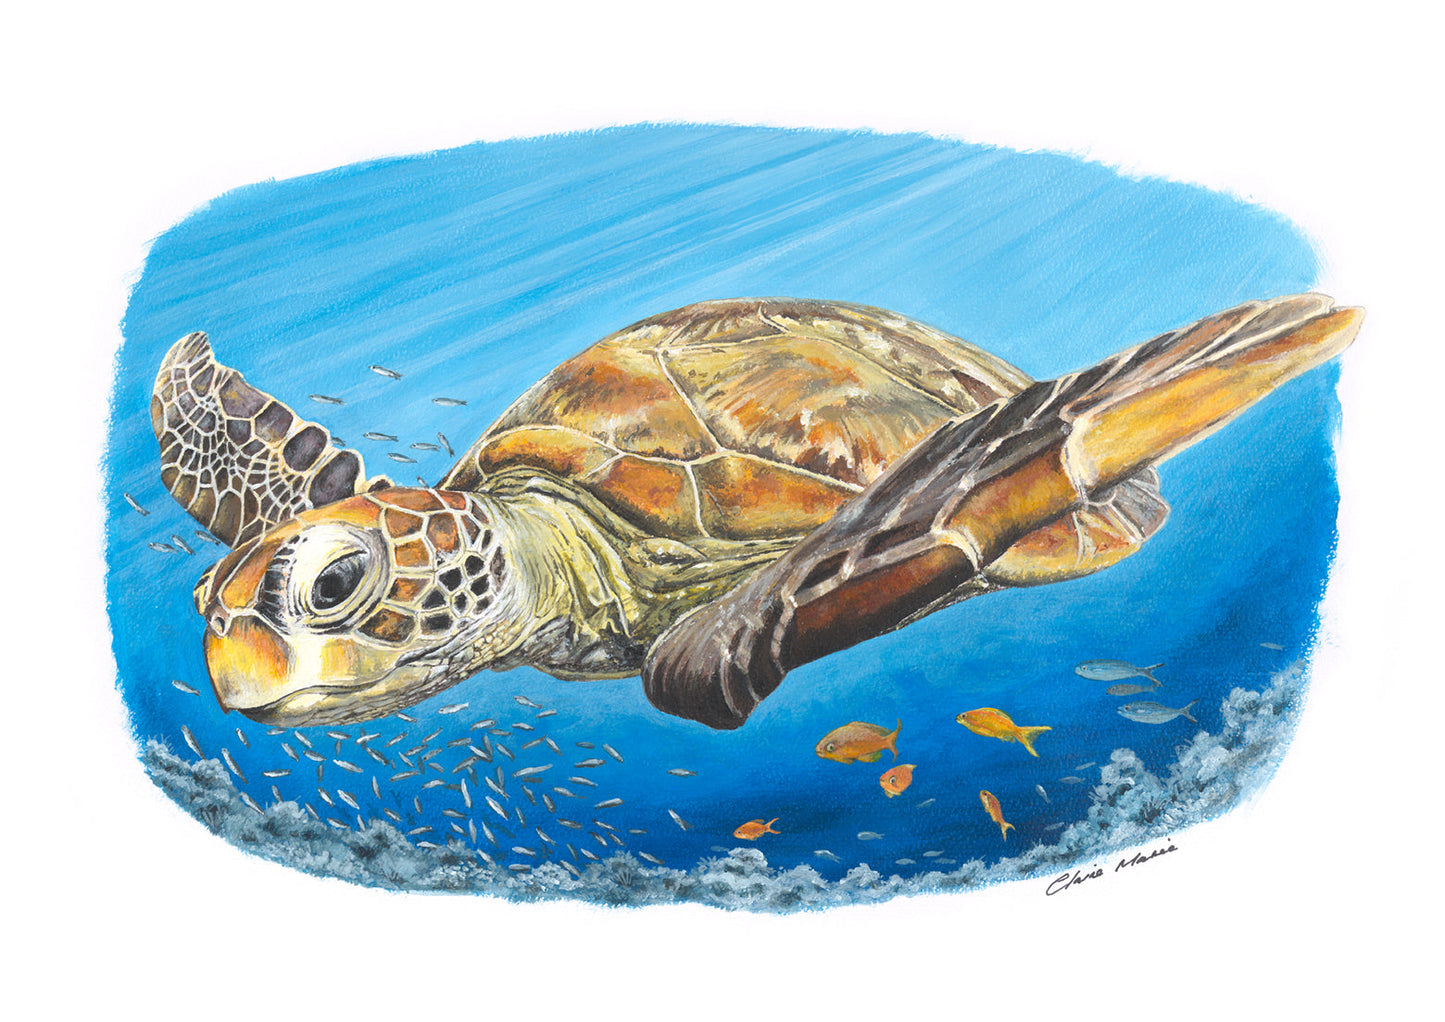 "Curious sea turtle with fish" - original acrylic painting on A3 paper